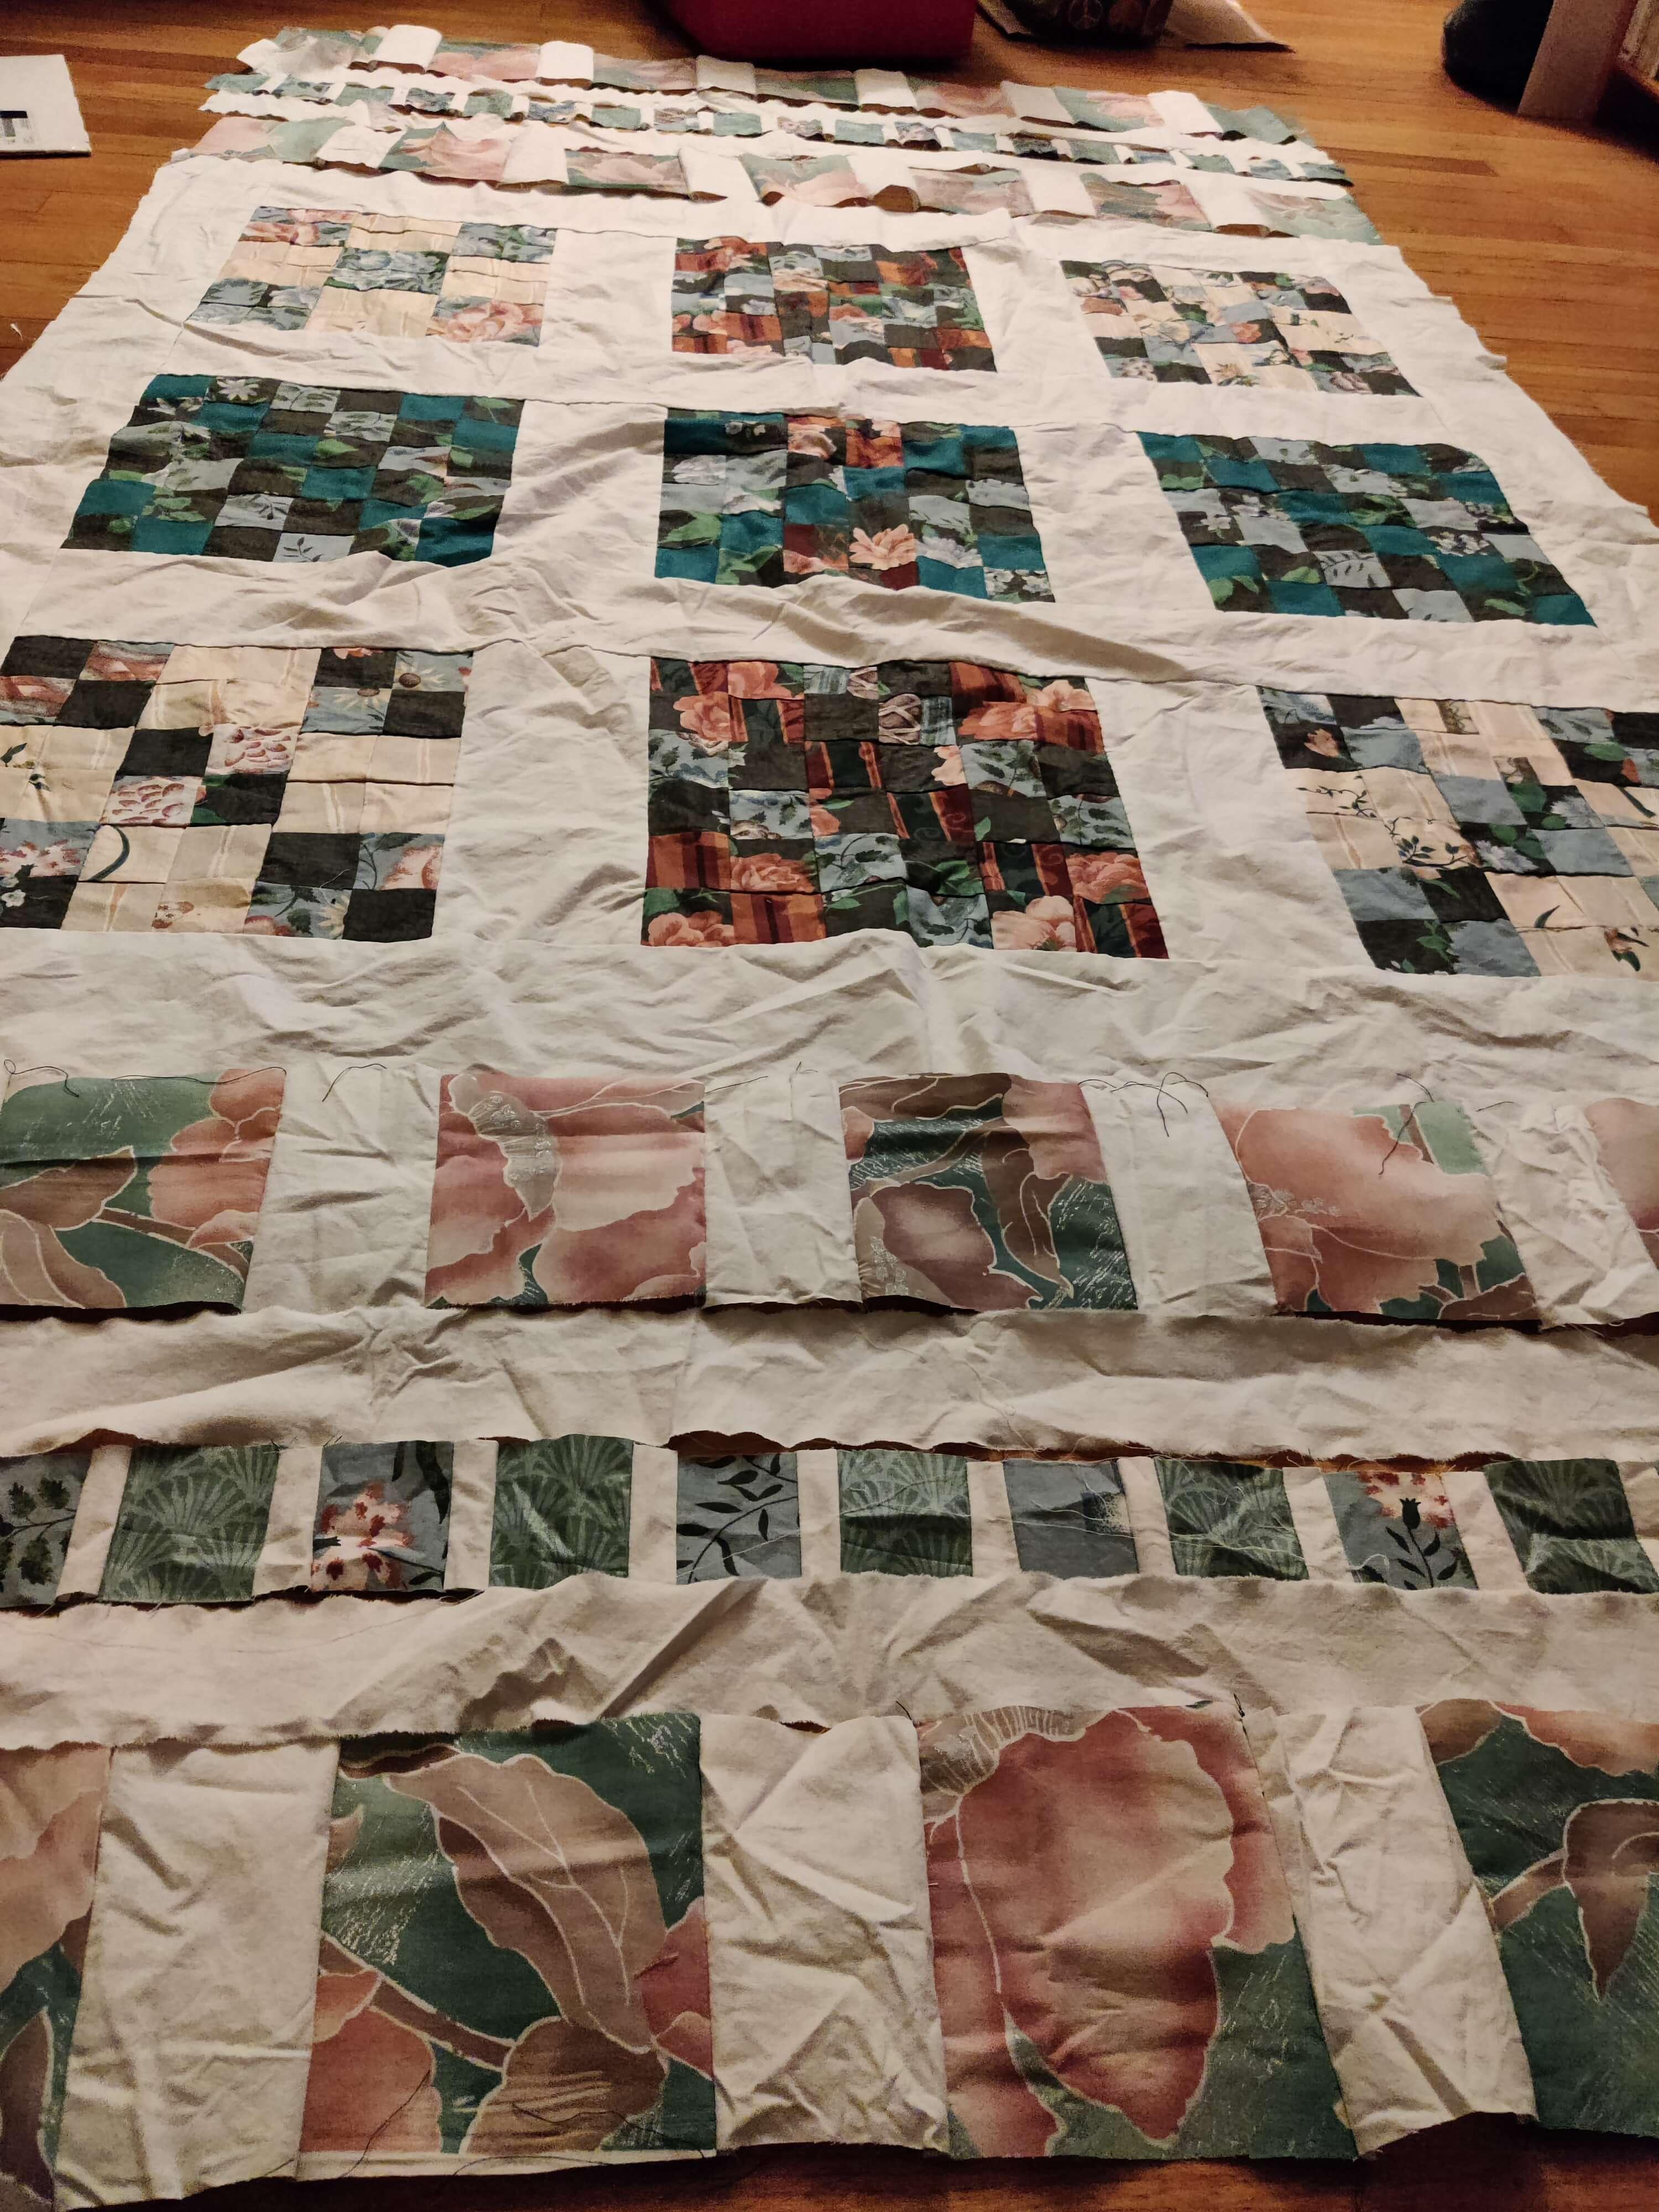 a very wrinkly patchwork quilt top in progress, with various sized squares of pink and blue floral fabric bordered with white